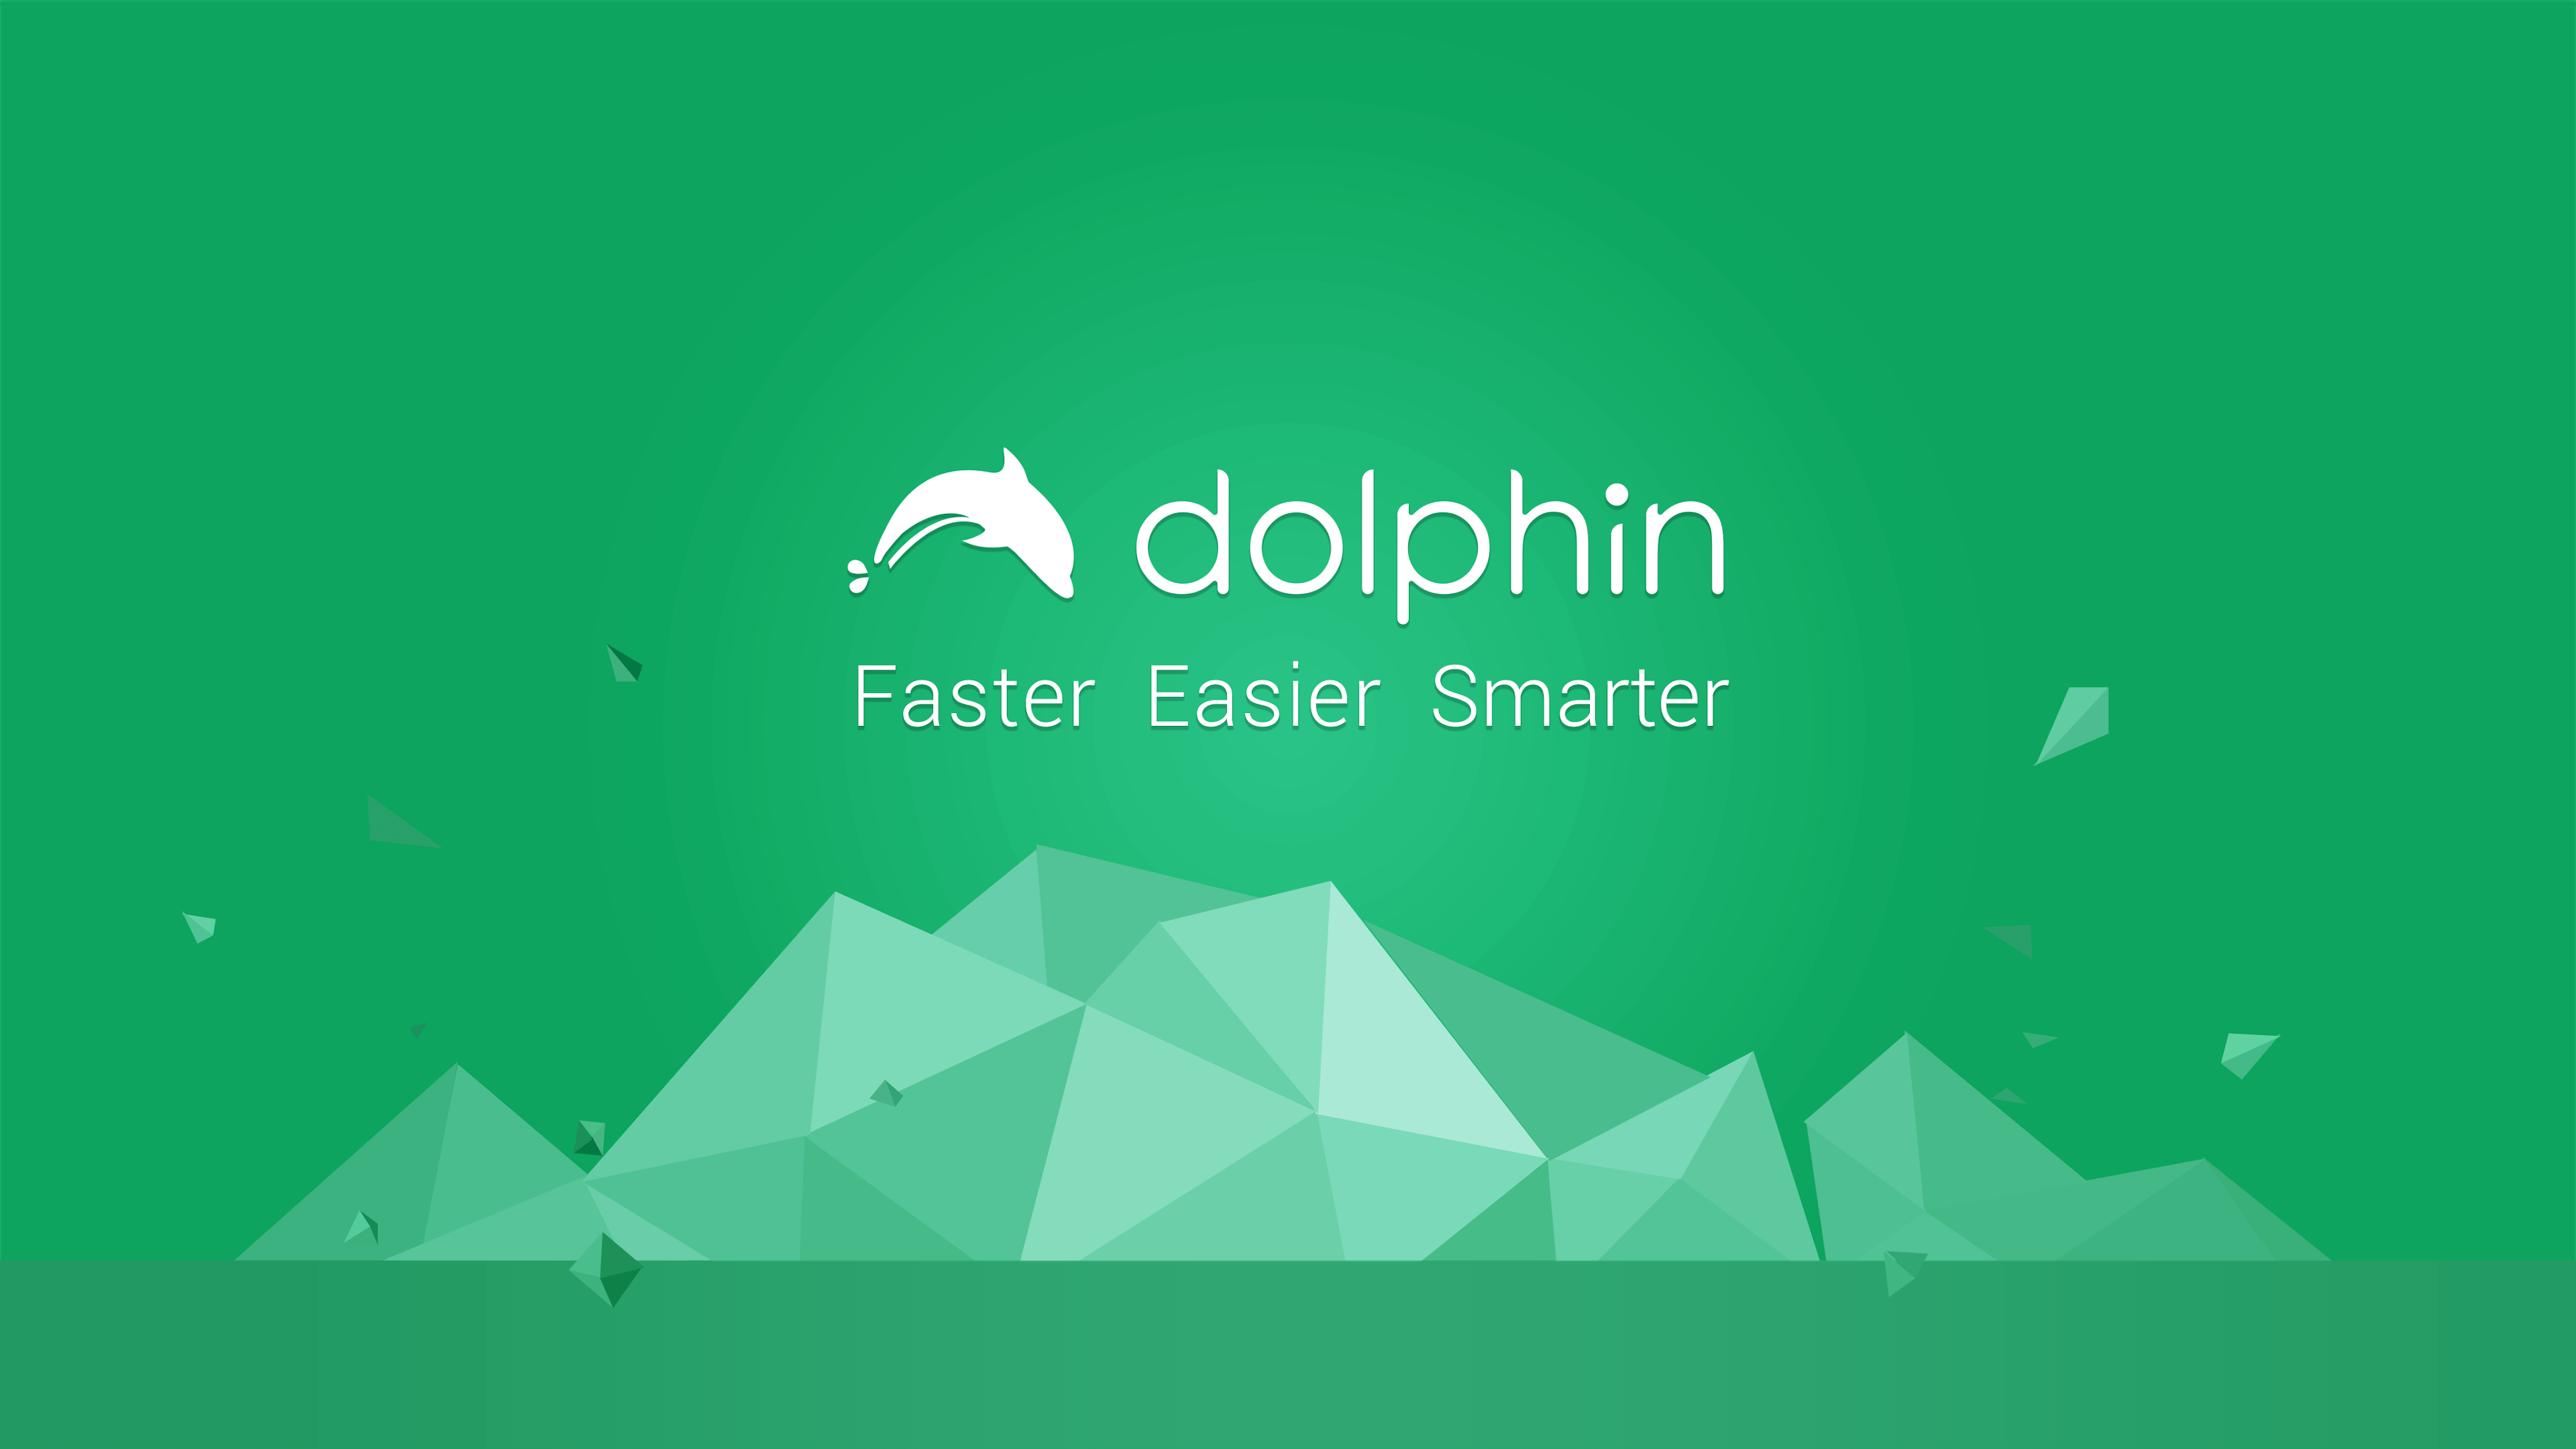 Android Apps by Dolphin Browser on Google Play